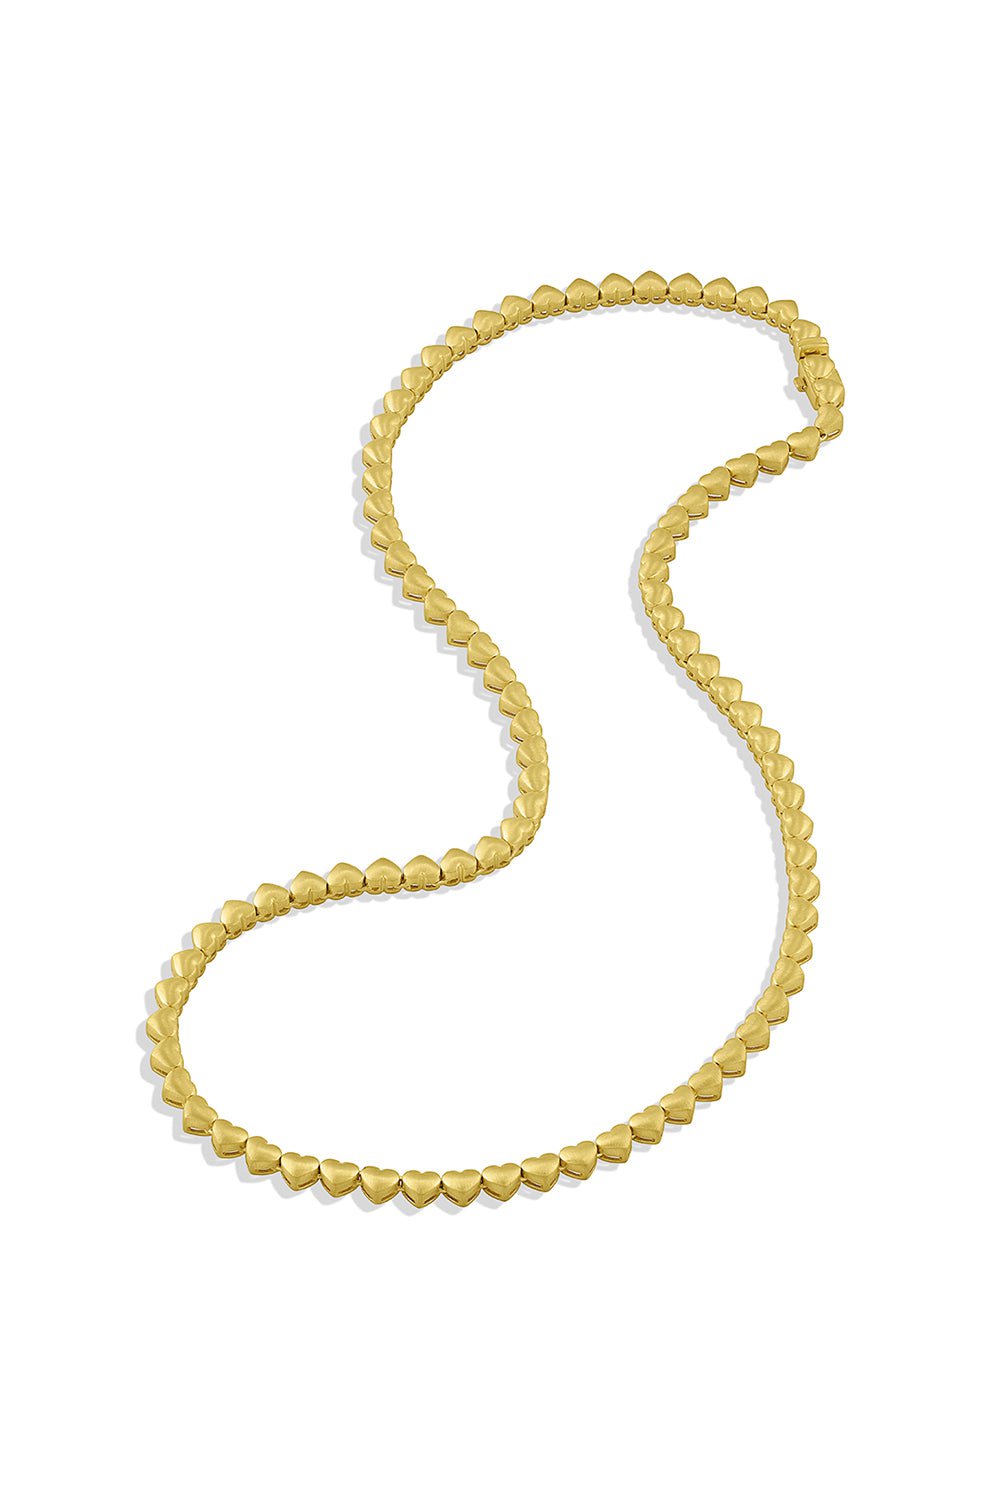 LEIGH MAXWELL-Solid Heart Tennis Necklace-YELLOW GOLD